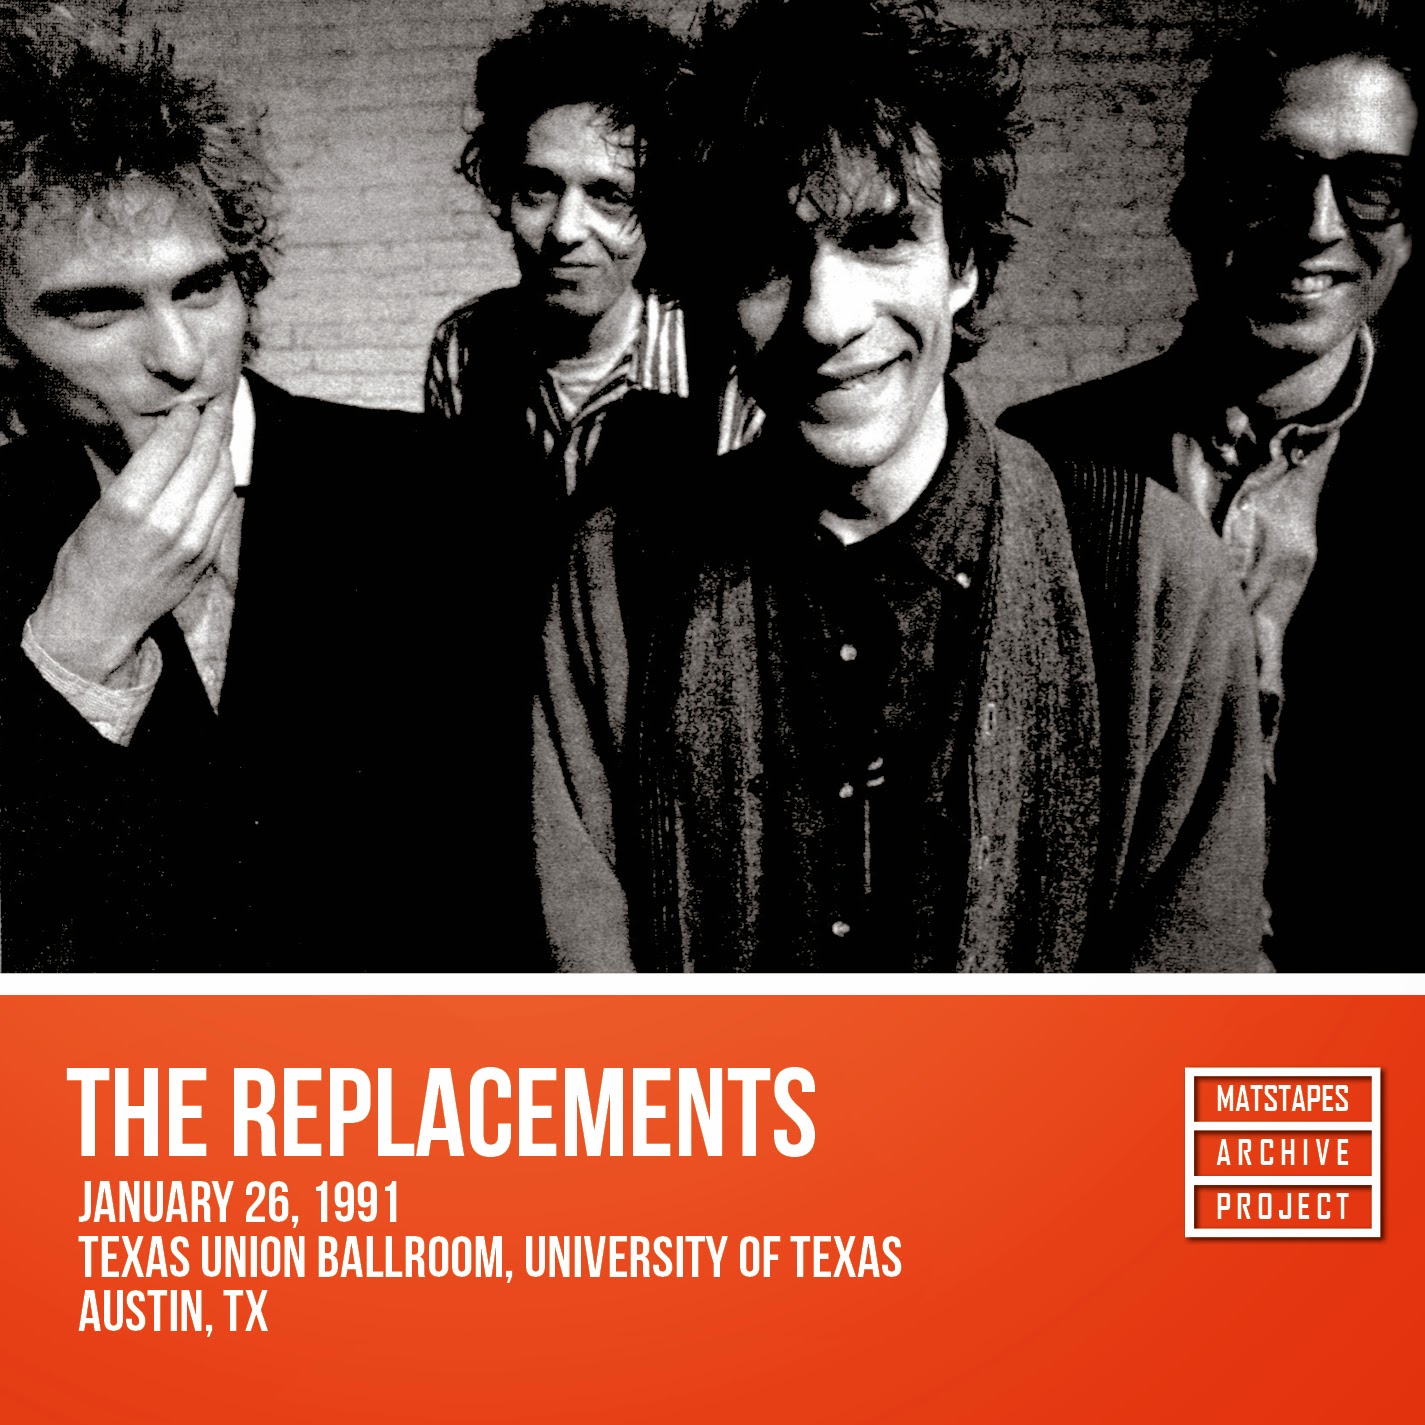 replacements tour 1991